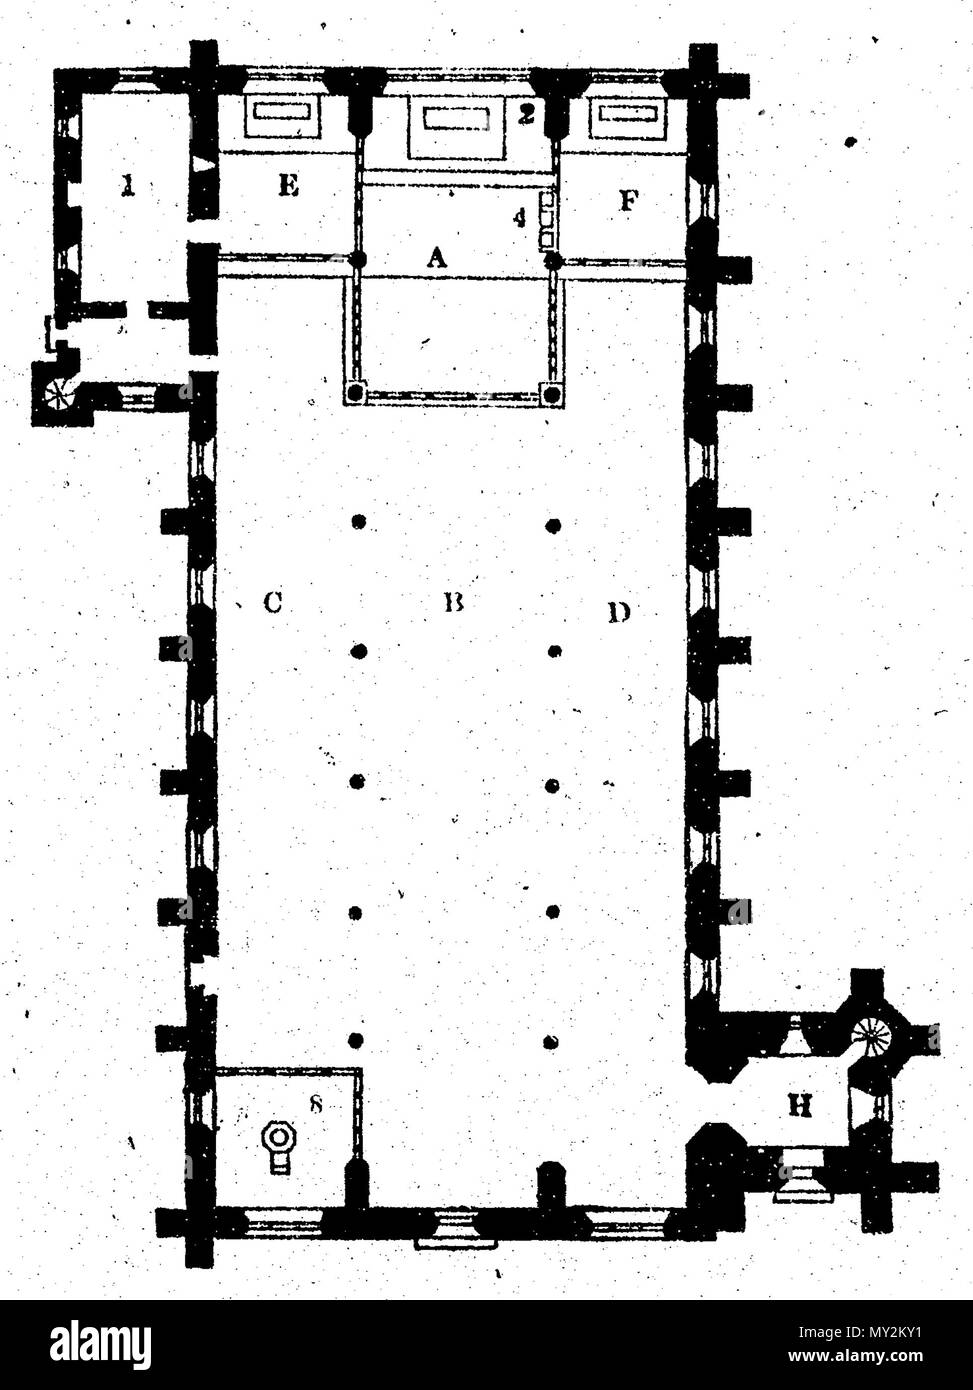 . English: Figure 9 of Suggestions on the Arrangement and Characteristics of Parish Churches. Original description by J. J. McCarthy on p. 17: Figures 8 and 9 show the plans of Churches, consisting of chancel, nave, and aisles: they are those of St. Anne's, Liverpool, and St. Mary's, “Star of the Sea,” Irishtown, near Dublin. A is the chancel; B, the nave; C, north aisle; D, south aisle. E F, figures 8 and 9, are side chapels. 1851. J. J. McCarthy 507 Suggestions on the Arrangement and Characteristics of Parish Churches Figure 09 Stock Photo